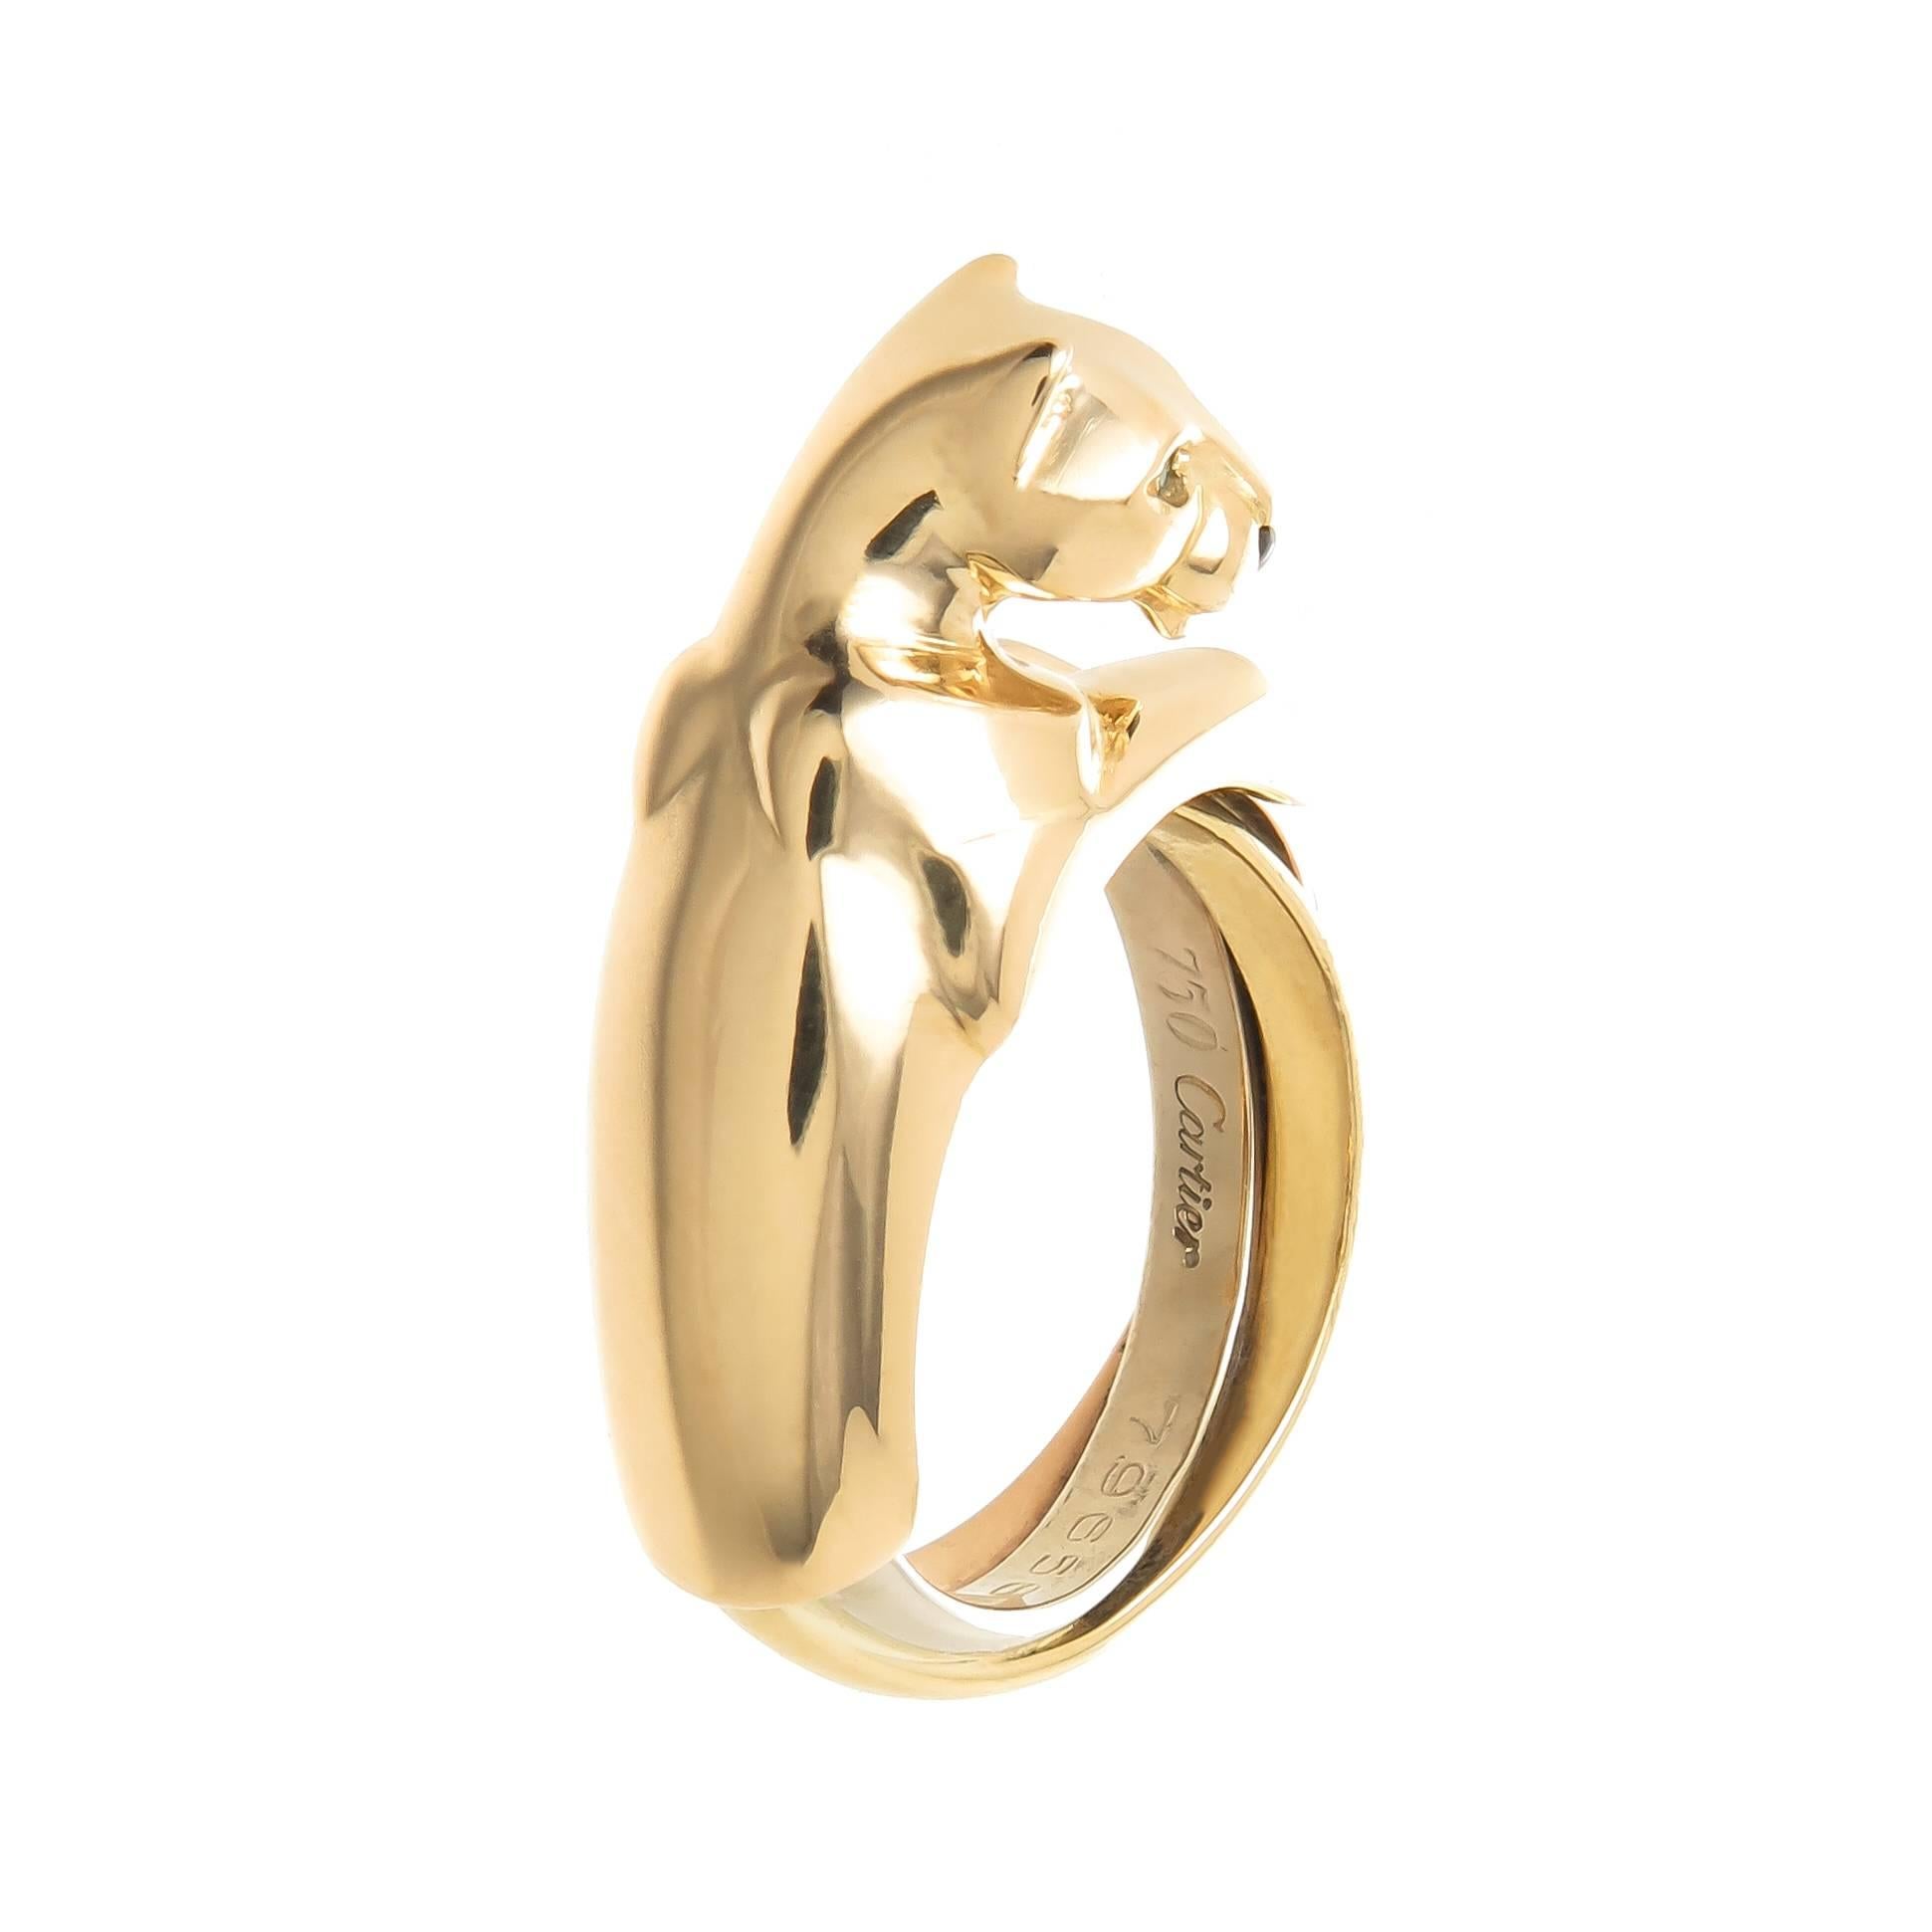 Circa 2000 Cartier Panther trinity ring. 18K Yellow Gold Panther atop Yellow, Rose and White Gold Trinity Bands. Emerald Eyes and a Black onyx Nose. Finger size 4. Comes in original Cartier presentation Box.